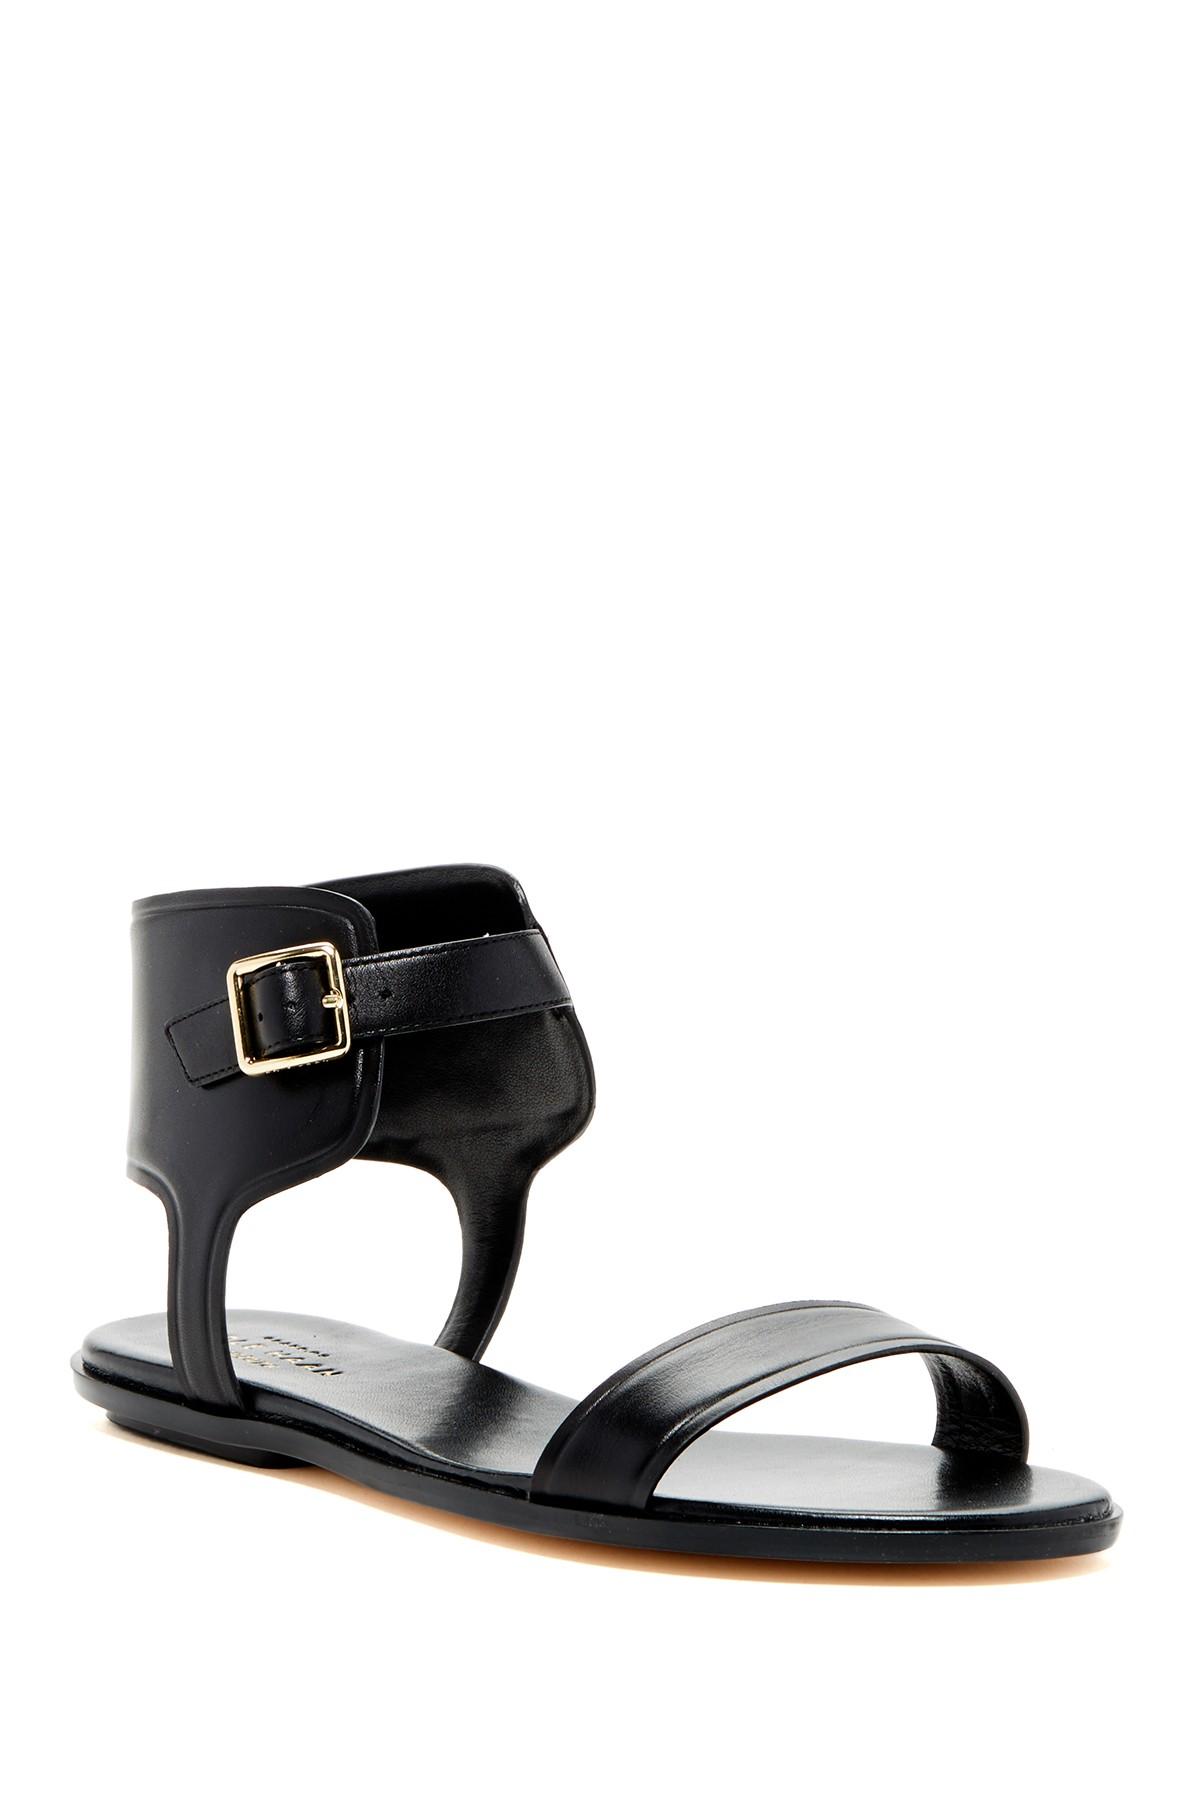 Cole Haan Leather Barra Ankle Cuff Sandals in Black Leather (Black) - Lyst